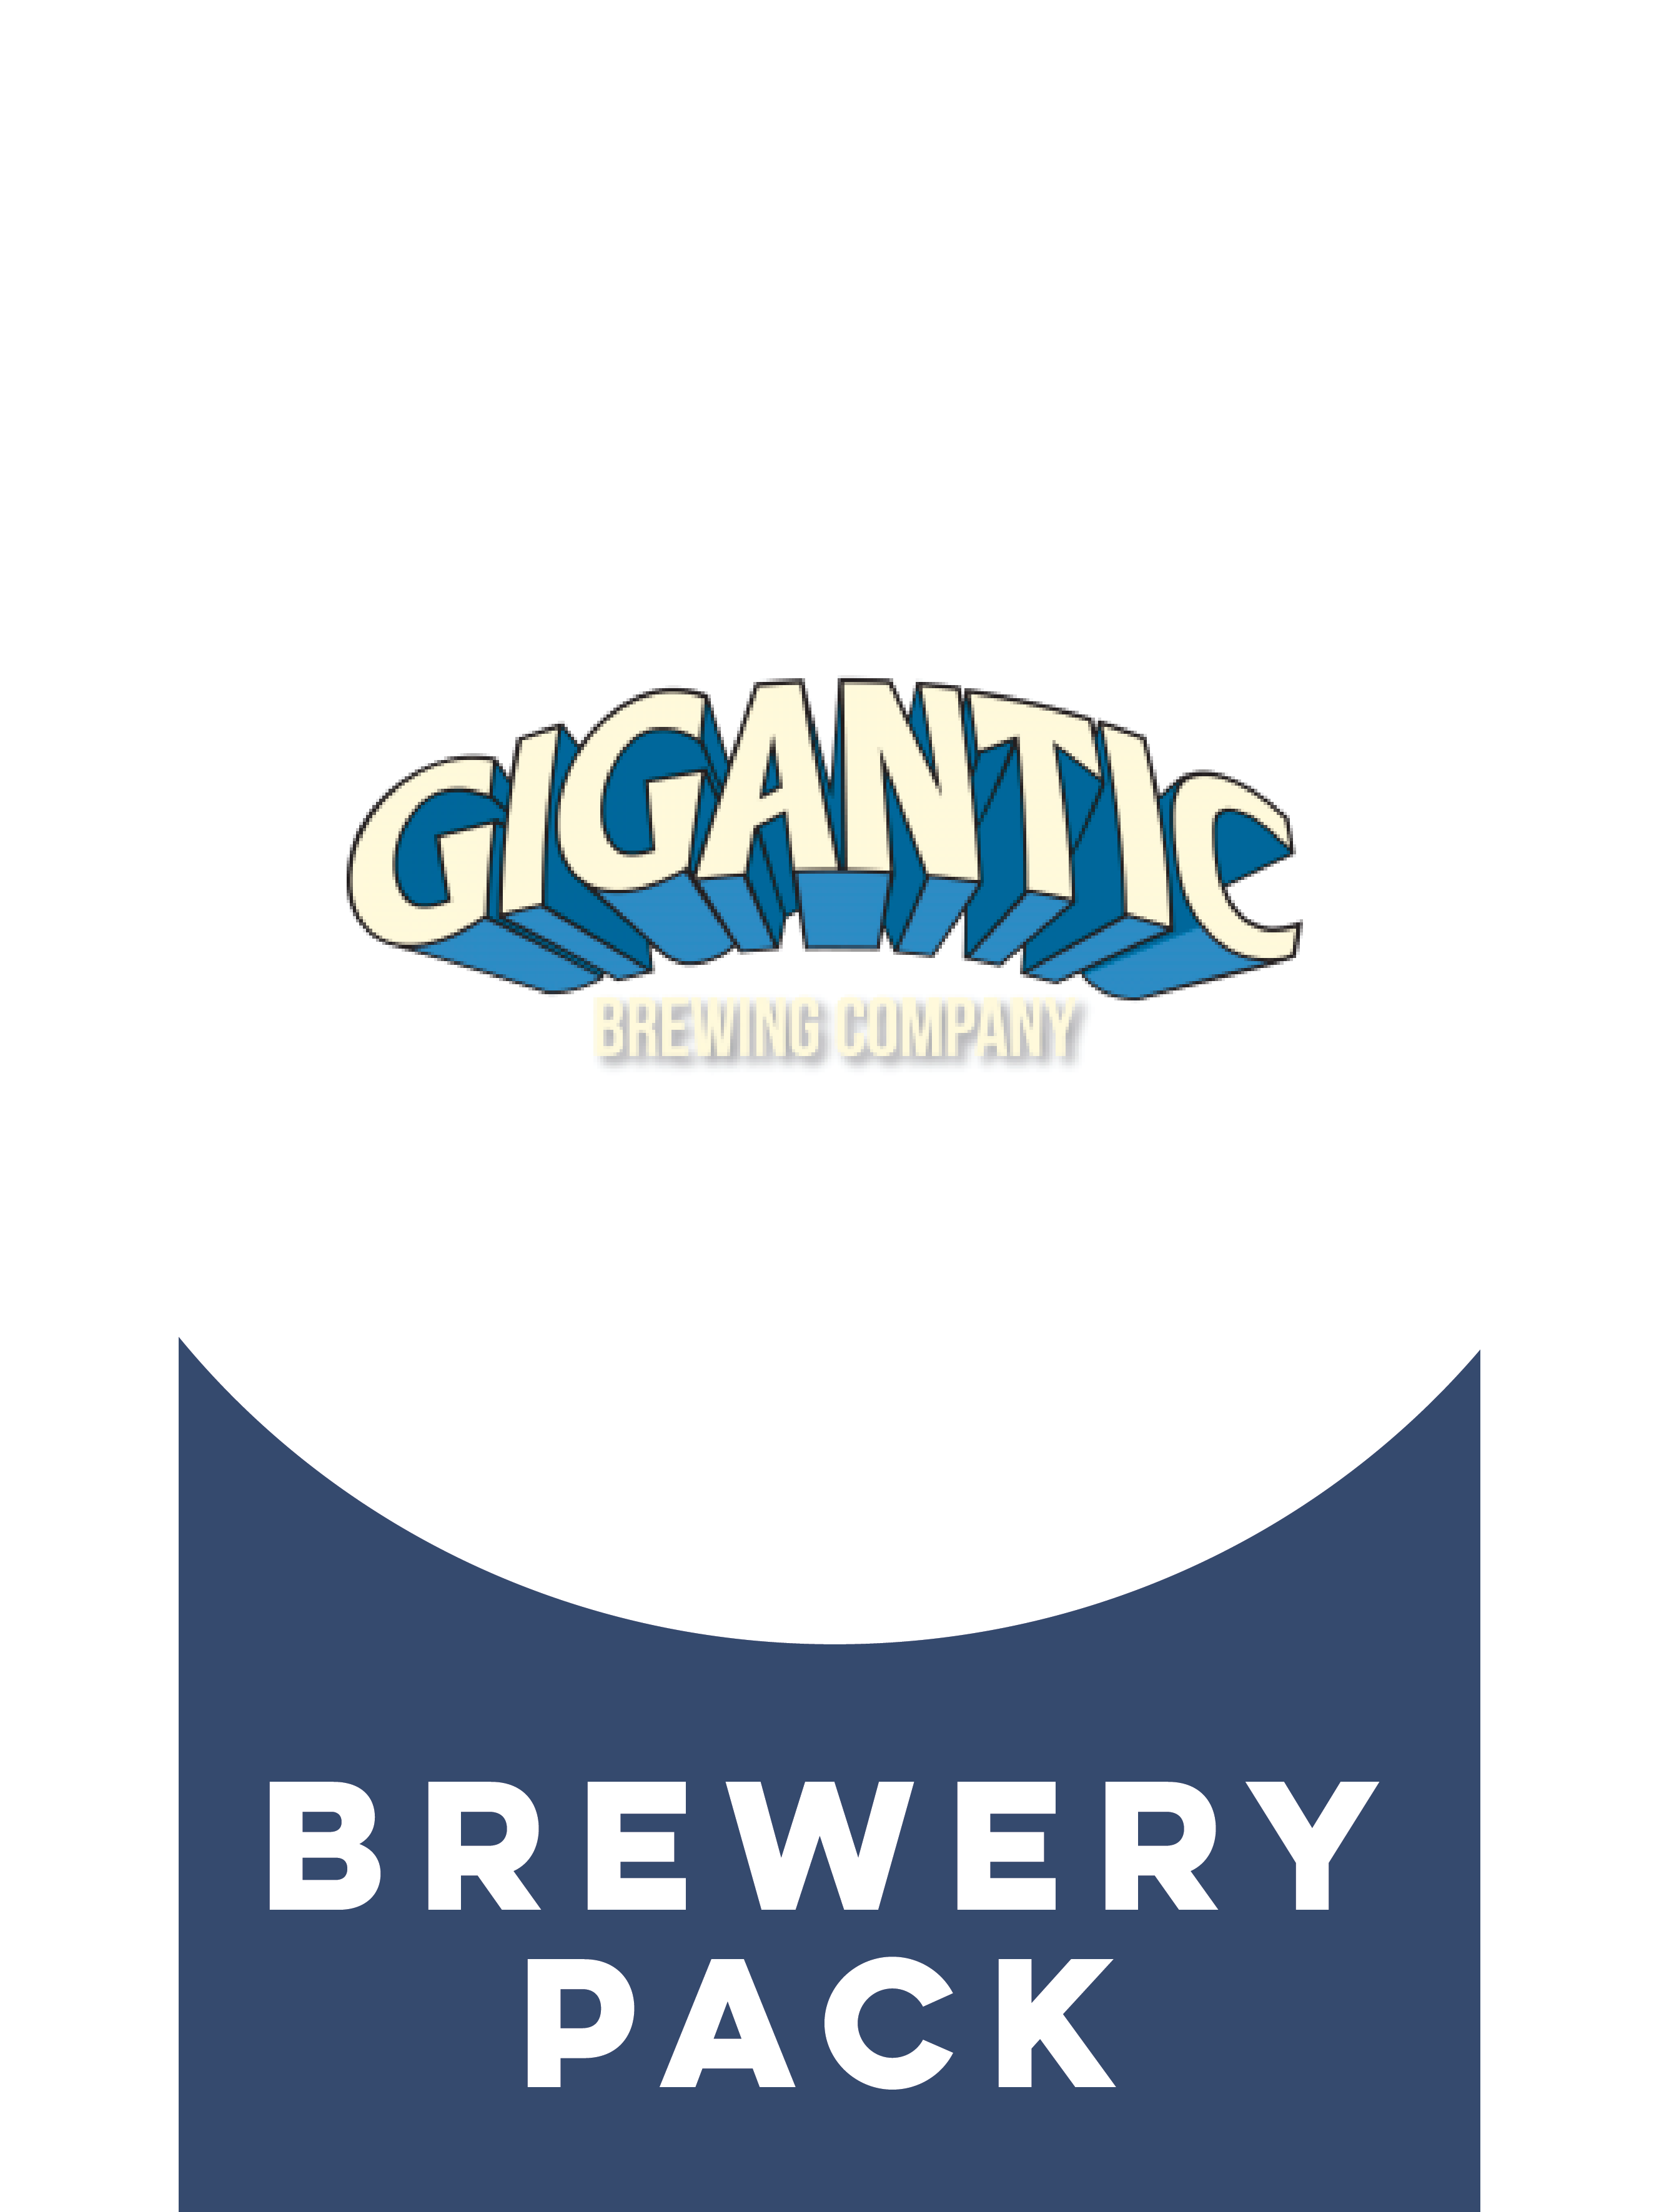 -Gigantic- Gigantic Brewery Pack-Packs & Cases- Only @ Beer Republic - The best online beer store for American & Canadian craft beer - Buy beer online from the USA and Canada - Bier online kopen - Amerikaans bier kopen - Craft beer store - Craft beer kopen - Amerikanisch bier kaufen - Bier online kaufen - Acheter biere online - IPA - Stout - Porter - New England IPA - Hazy IPA - Imperial Stout - Barrel Aged - Barrel Aged Imperial Stout - Brown - Dark beer - Blond - Blonde - Pilsner - Lager - Wheat - Weizen 